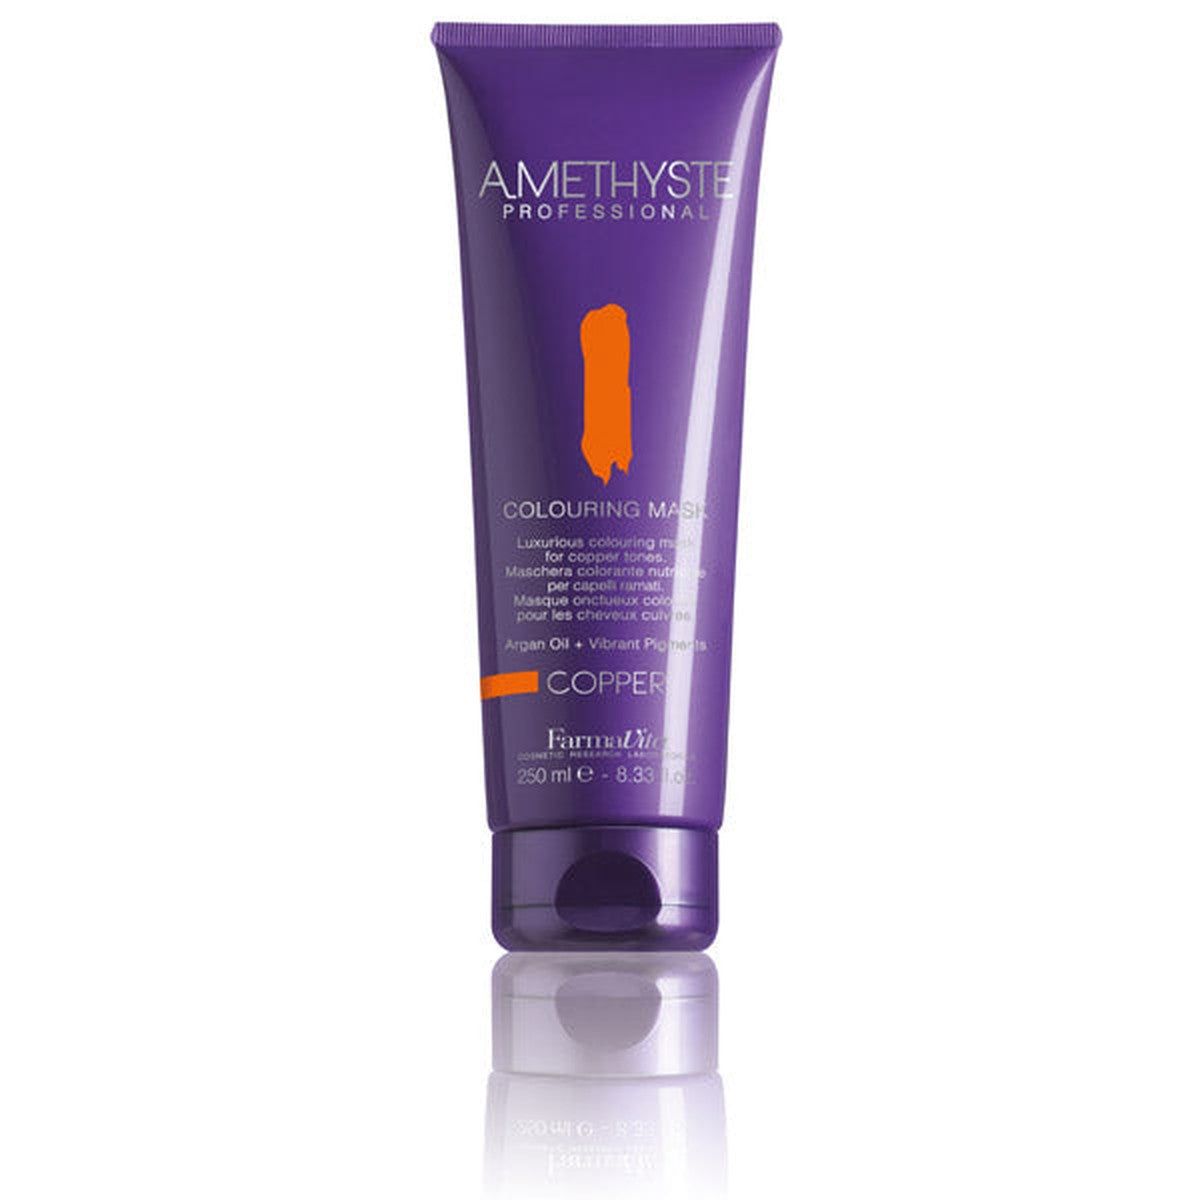 Amethyste Colouring Mask Copper 250ml-Finesthair